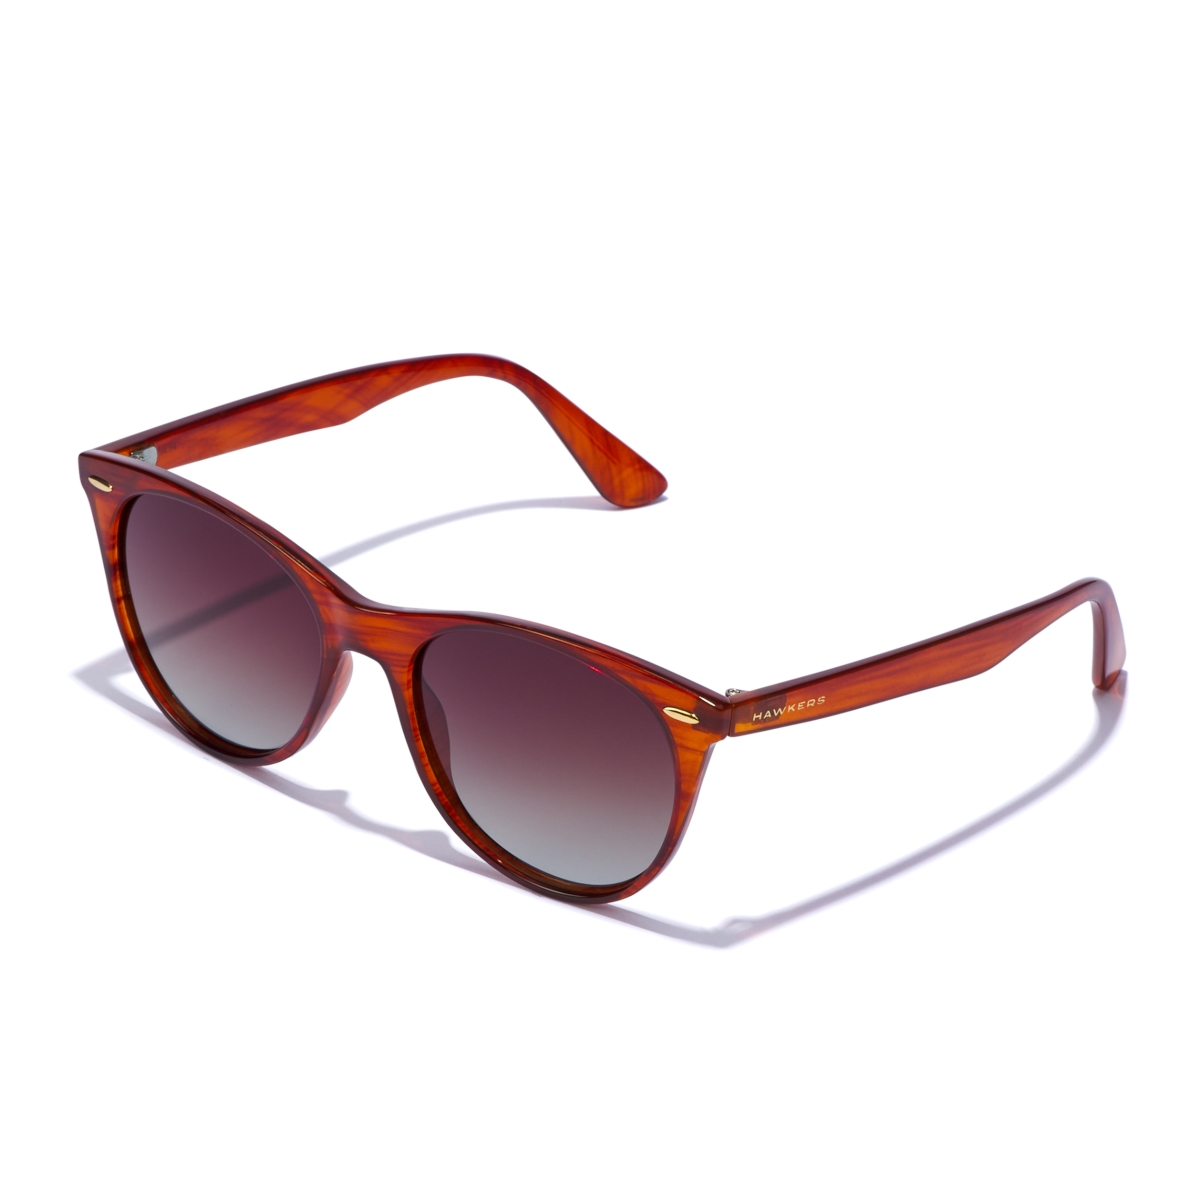 Harlow - Polarized Brown Horn